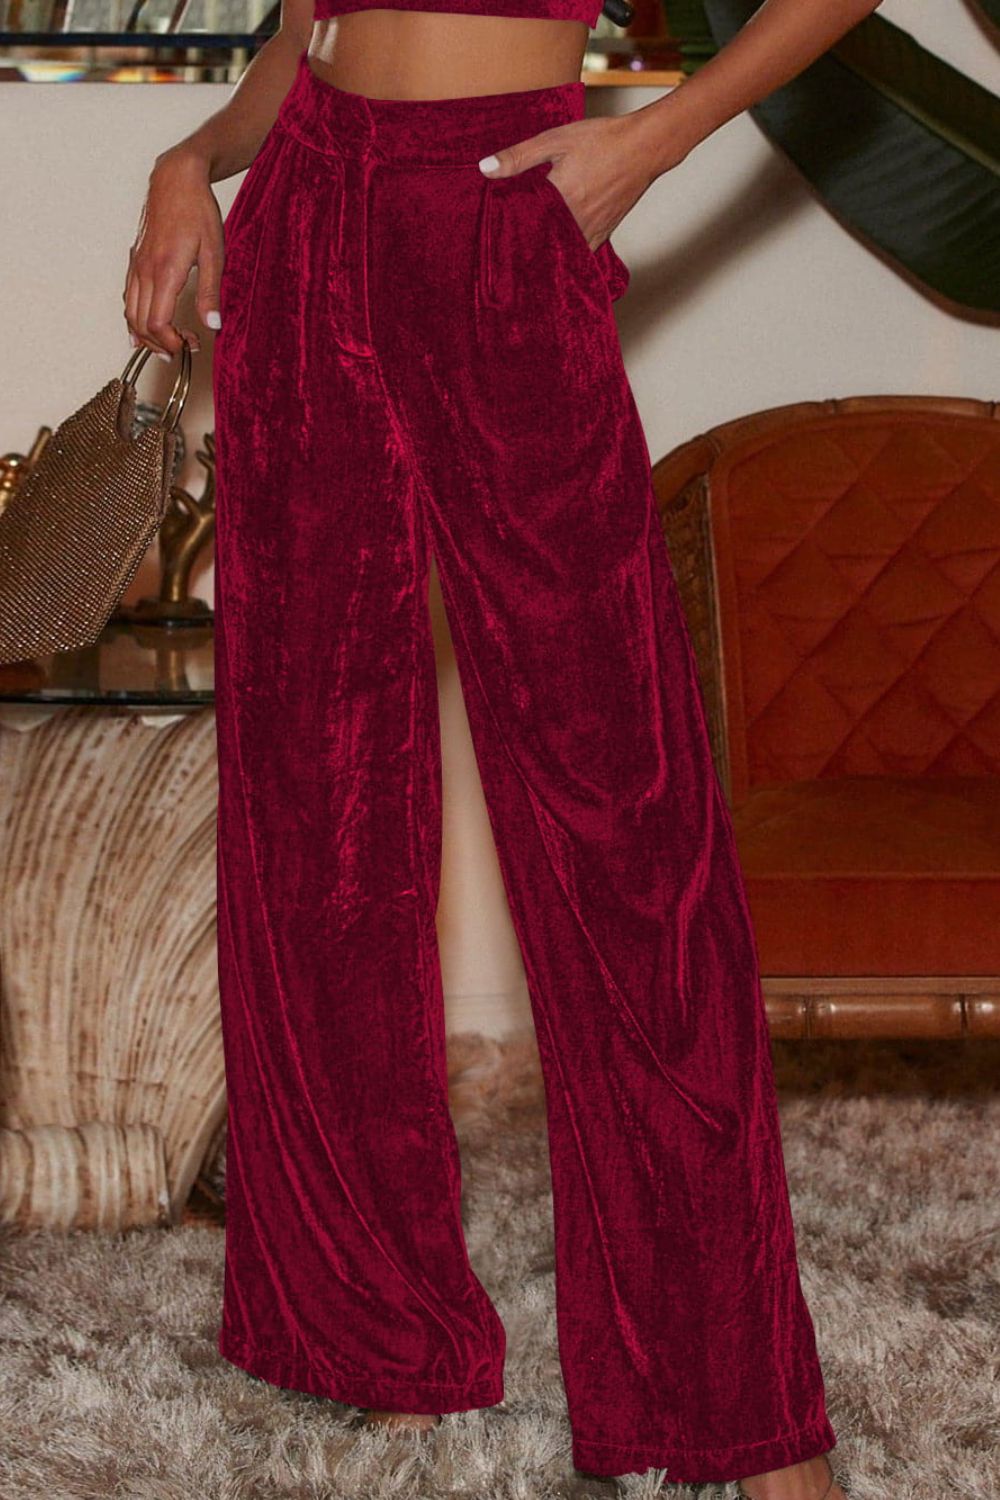 Loose Fit High Waist Long Pants with Pockets - Dark Red / S - Bottoms - Pants - 15 - 2024